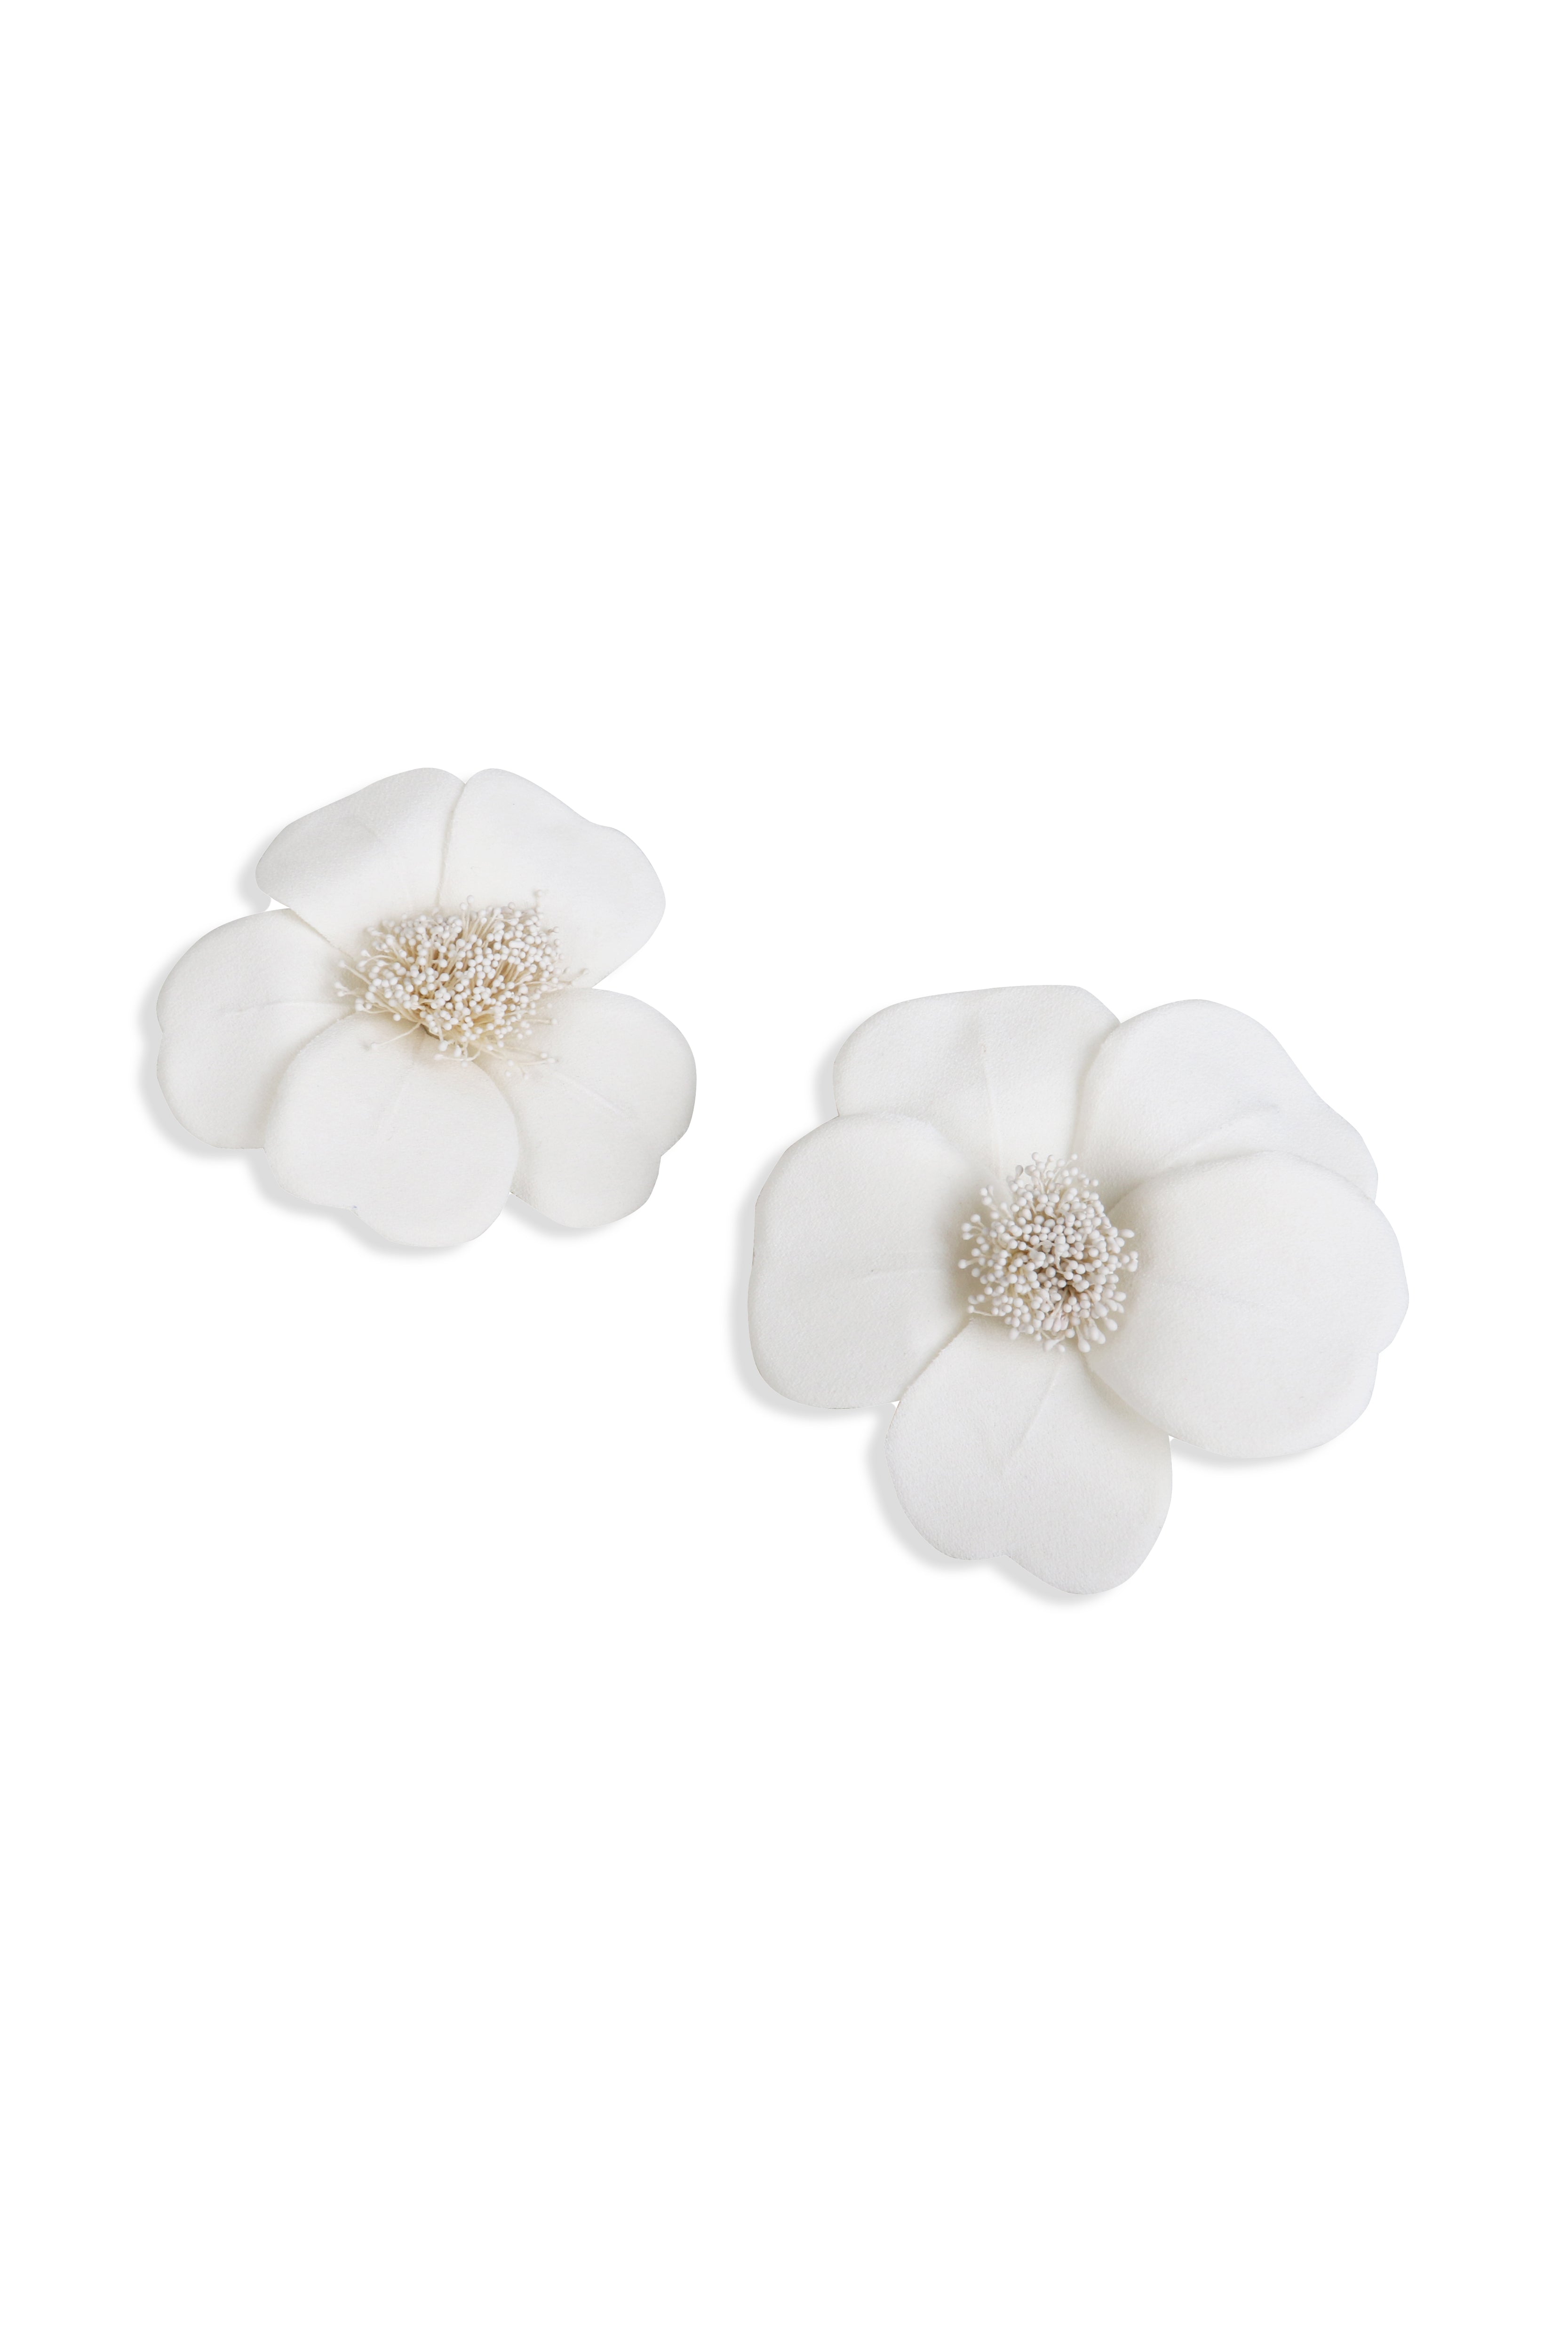 FRENCH CHIC FLOWER PINS